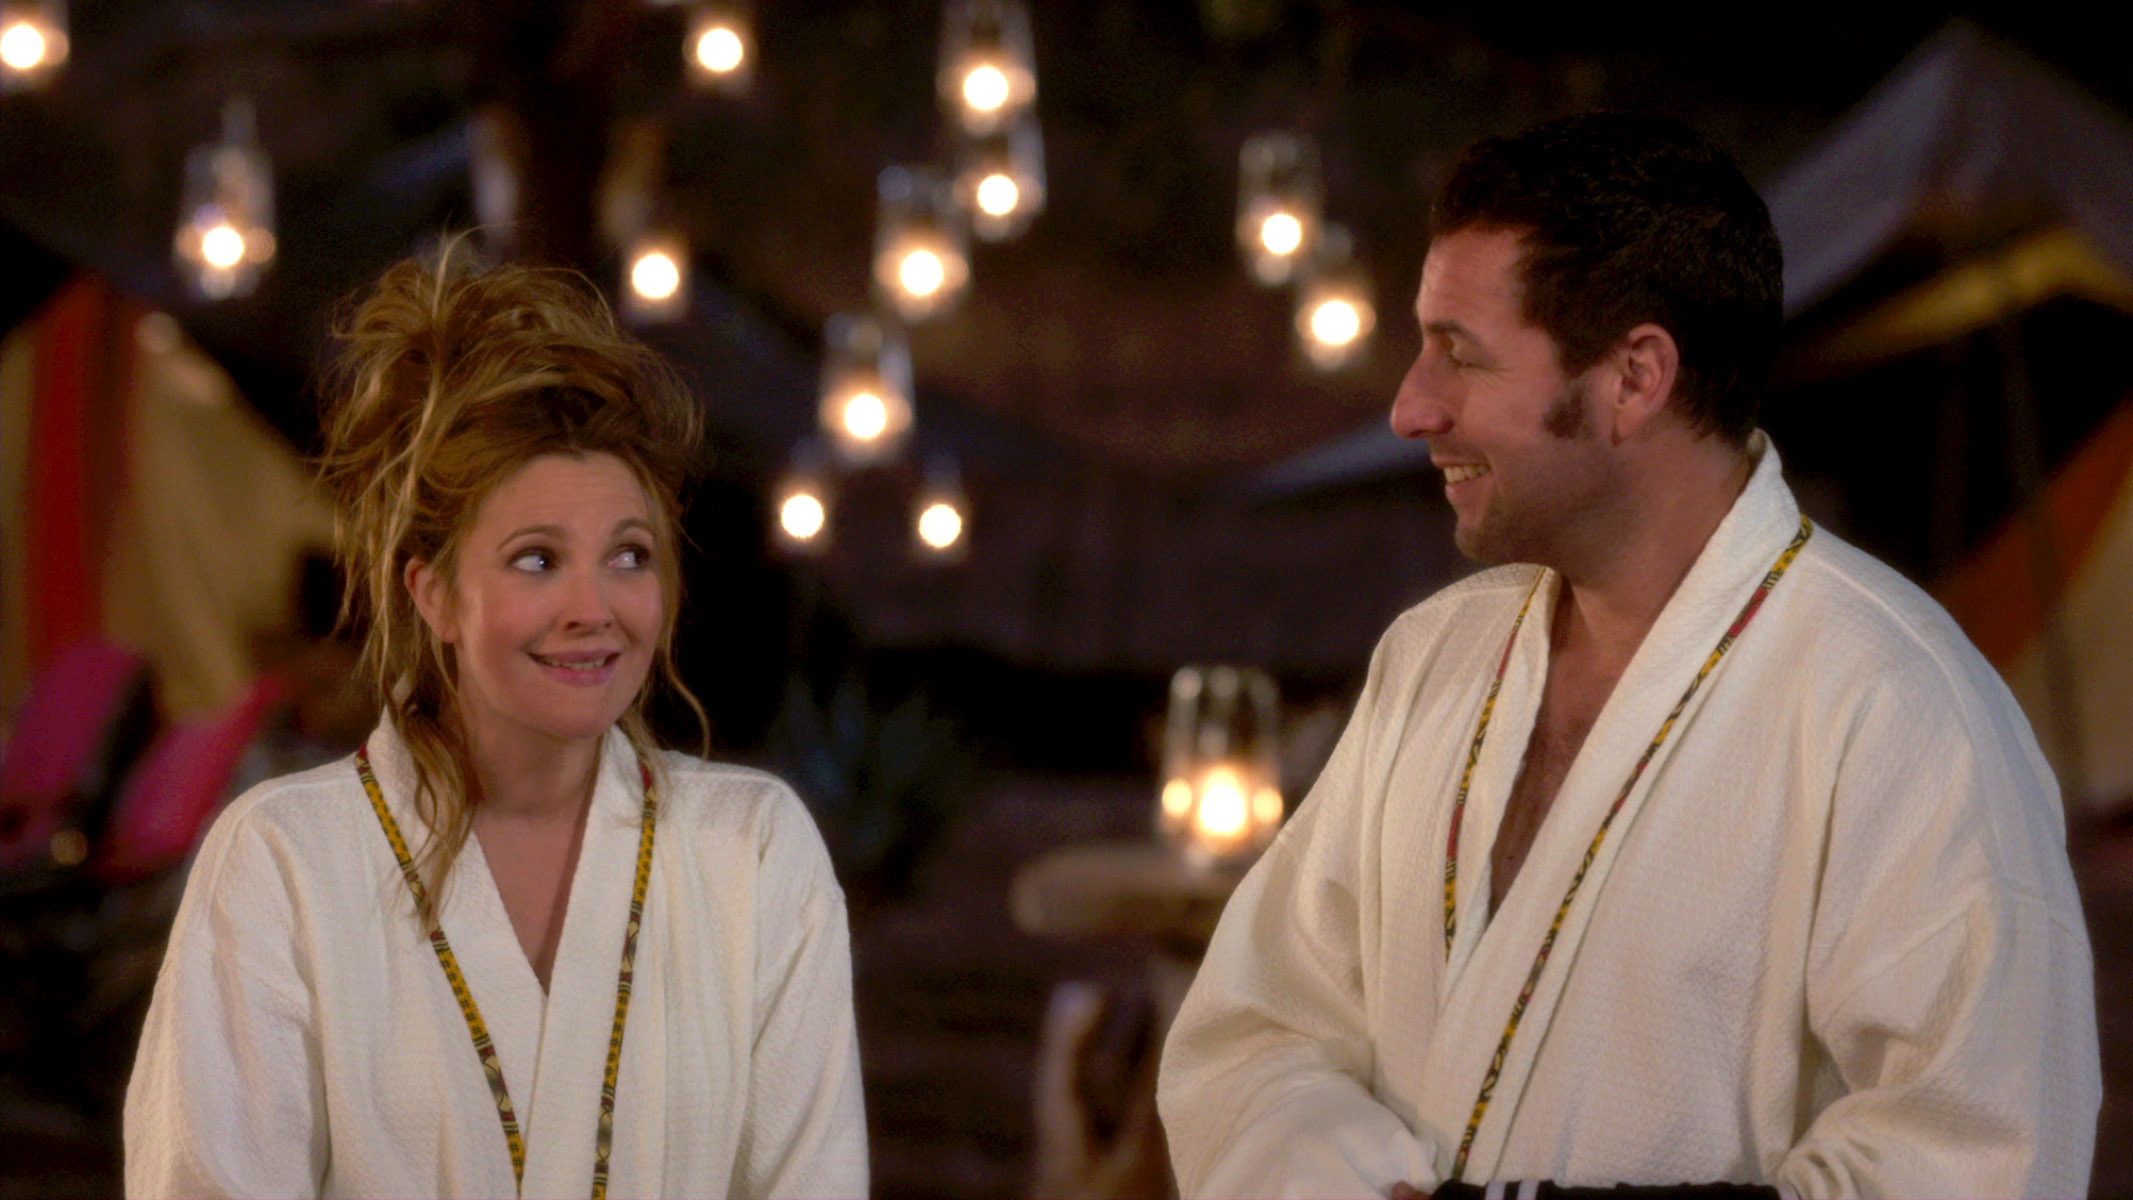 Drew Barrymore and Adam Sandler enjoy a moment to themselves at a South African resort in Blended.